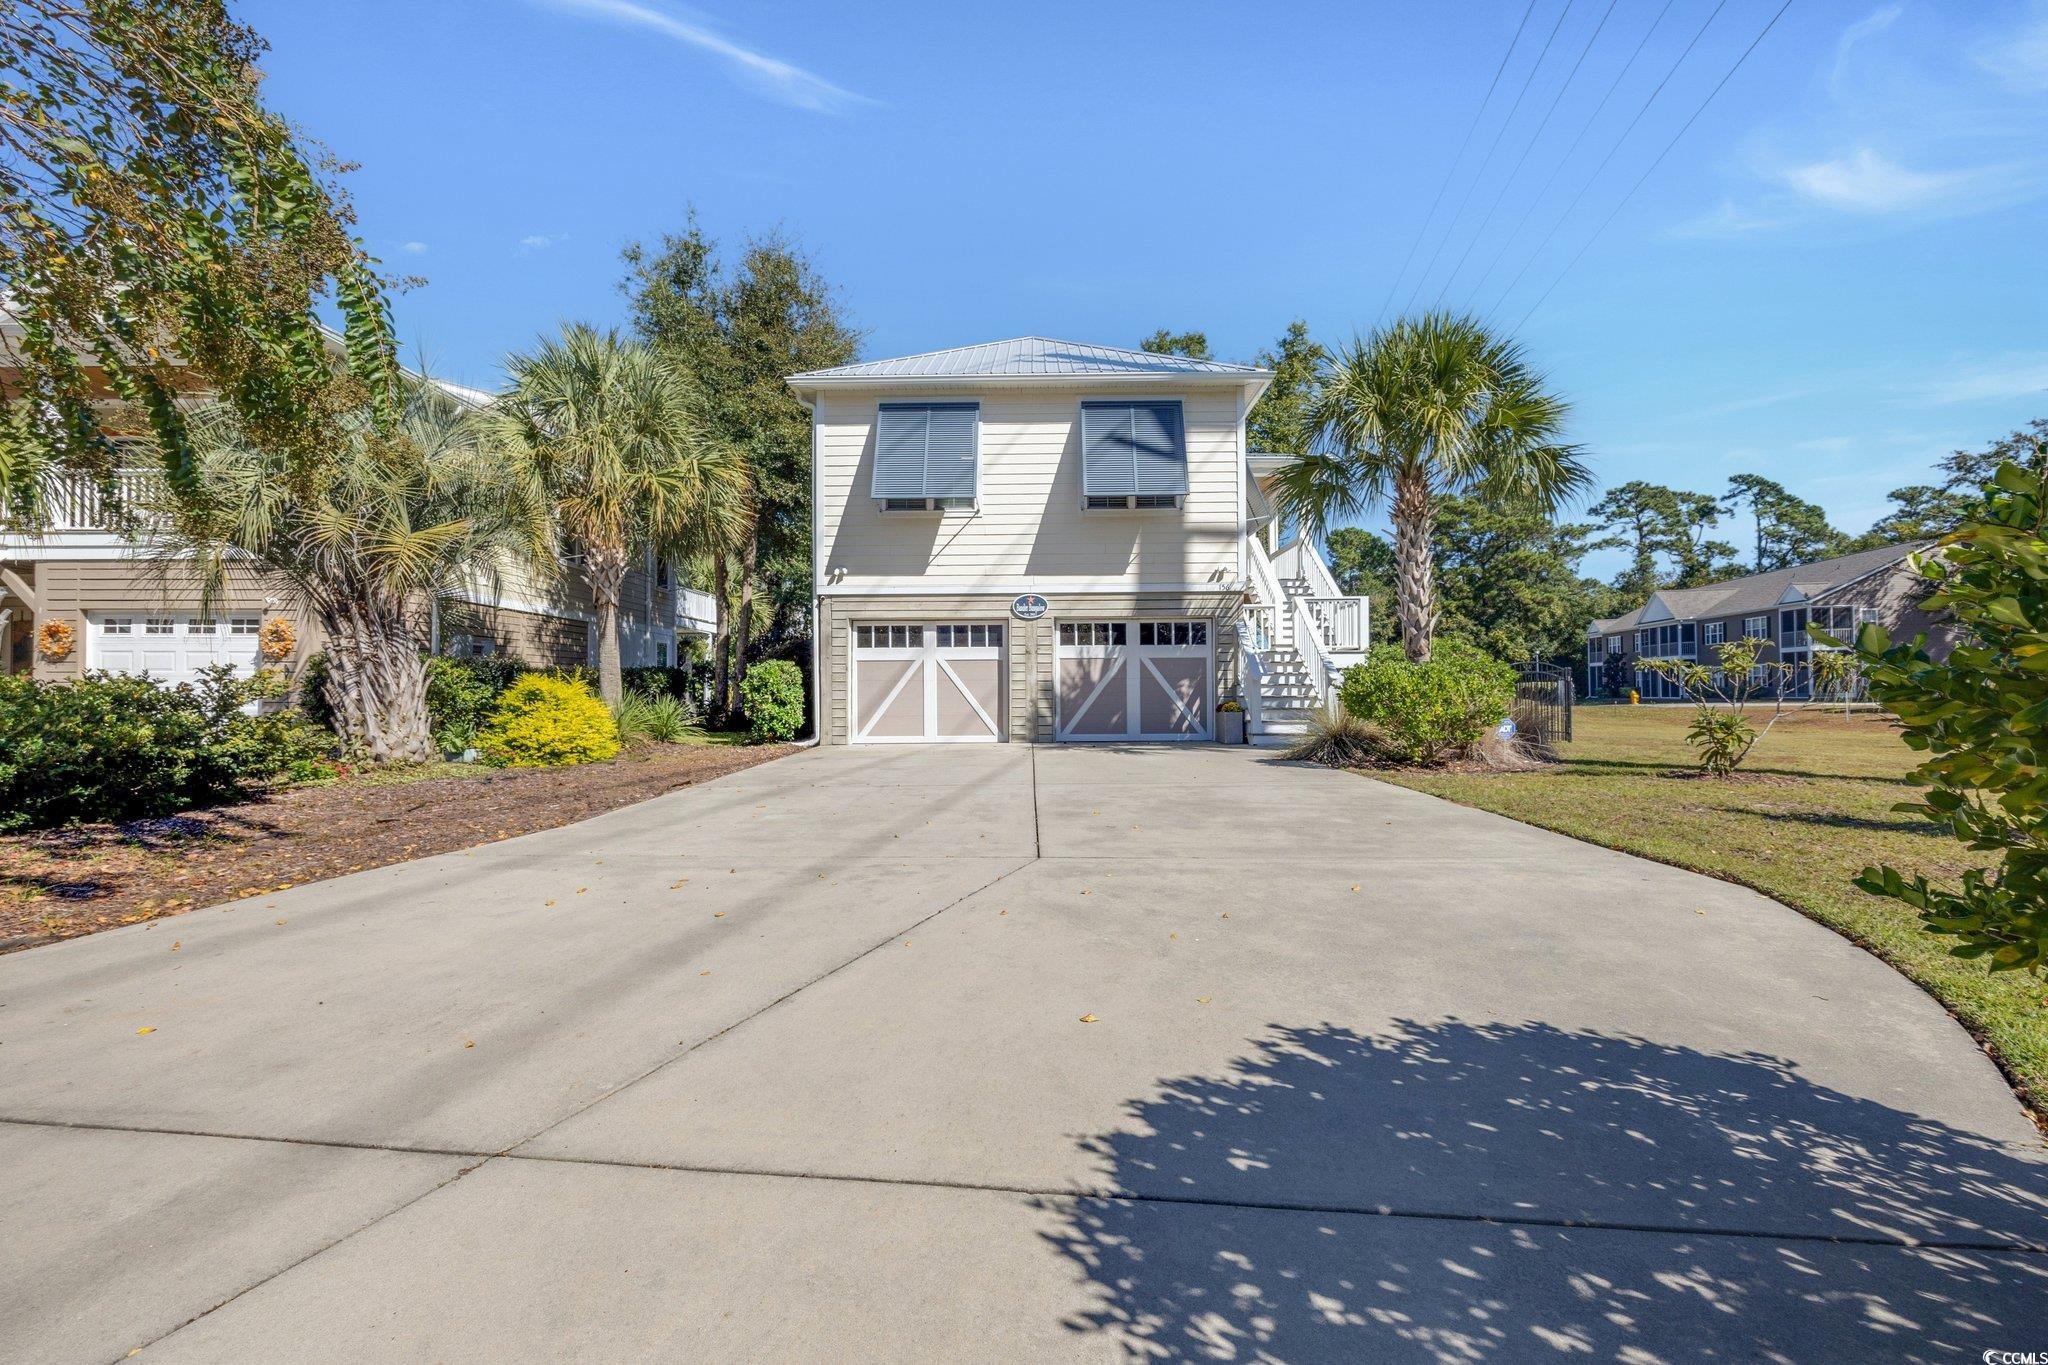 welcome to the atalaya cove community in pawleys island, south carolina. this raised beach-style home features an enclosed garage with ample parking and storage space. 156 harbourreef dr. is a meticulously maintained three-bedroom, 2 1/2 bath residence. the open floor plan boasts exquisite wainscoting accents throughout the home.the kitchen offers generous space for entertaining. the primary bedroom is located on the upper level with an ensuite bathroom with a walk-in shower, while the lower level features two additional bedrooms and a full bath. gently used as a second home and still shows like a model, close to pawleys island and litchfield beaches, golf courses and fine dining.